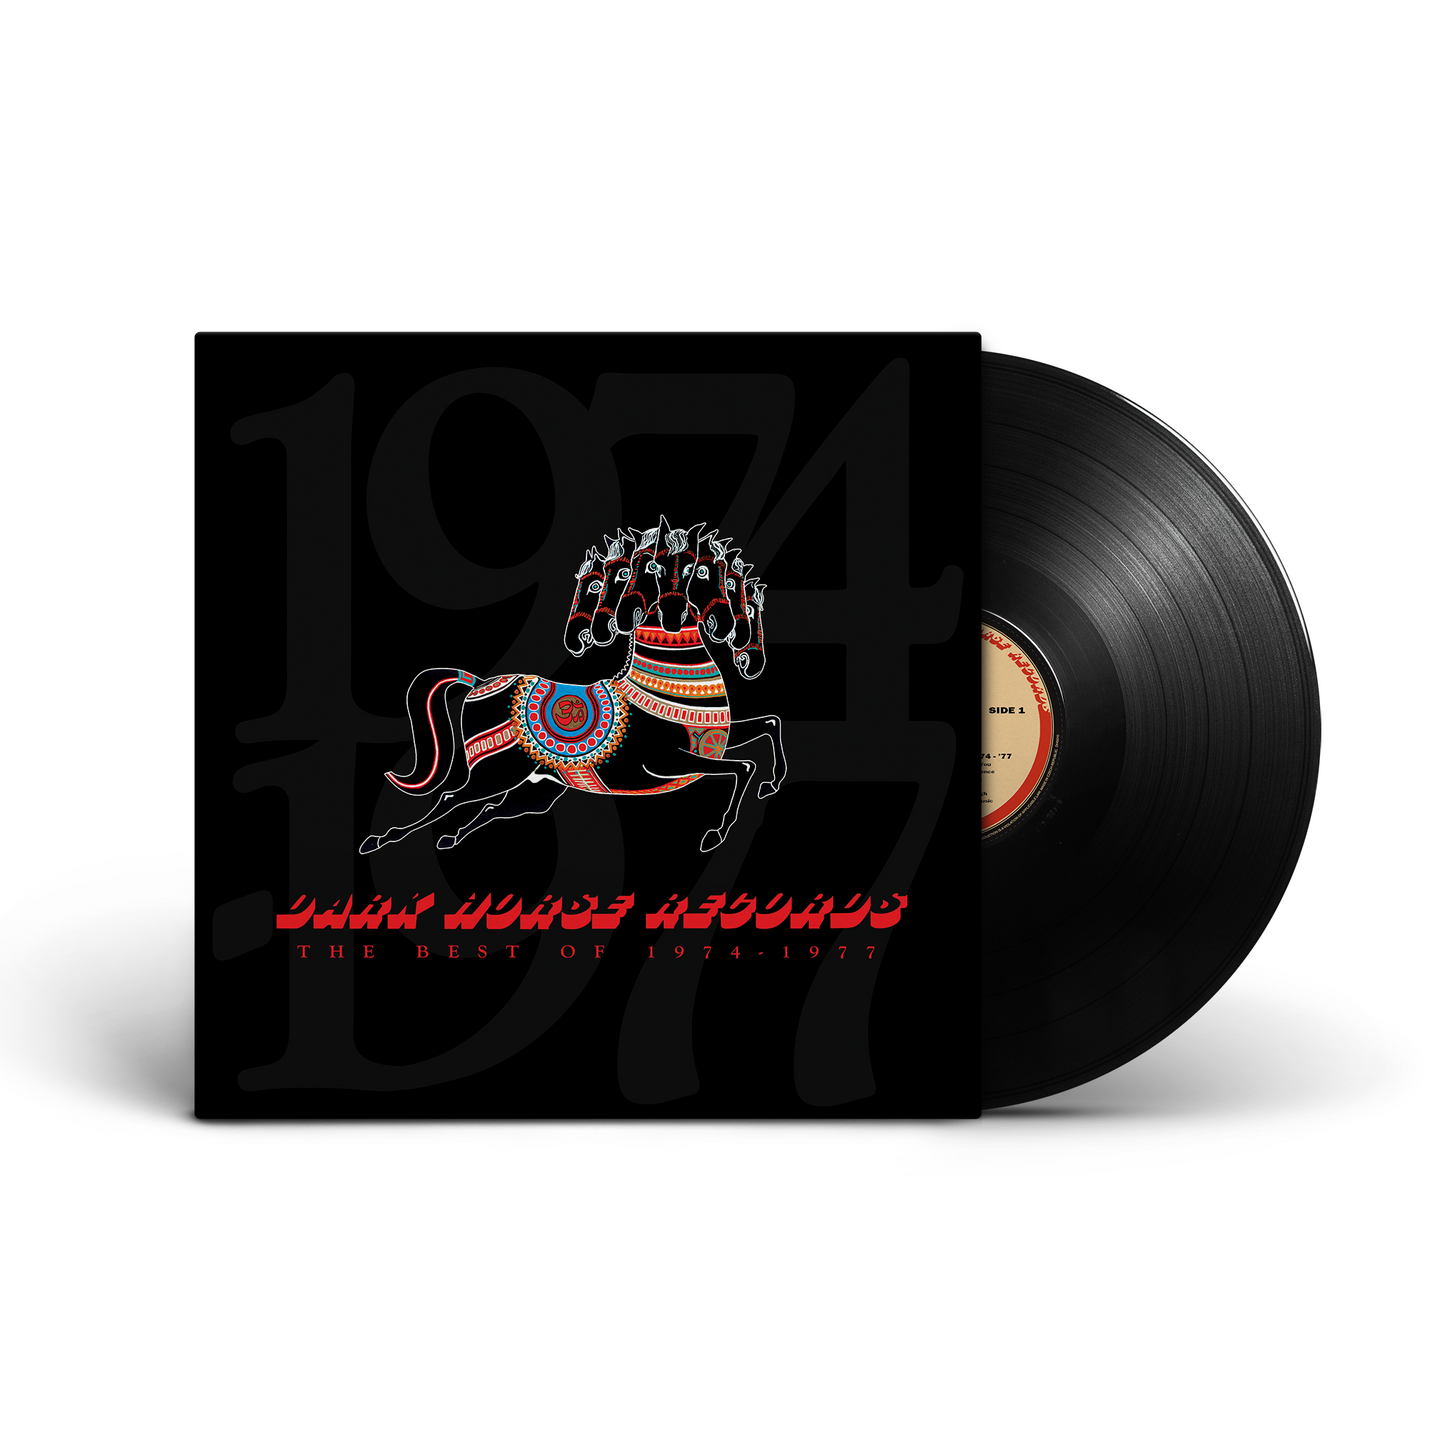 The Best of Dark Horse Records: 1974-1977 Limited Edition Vinyl